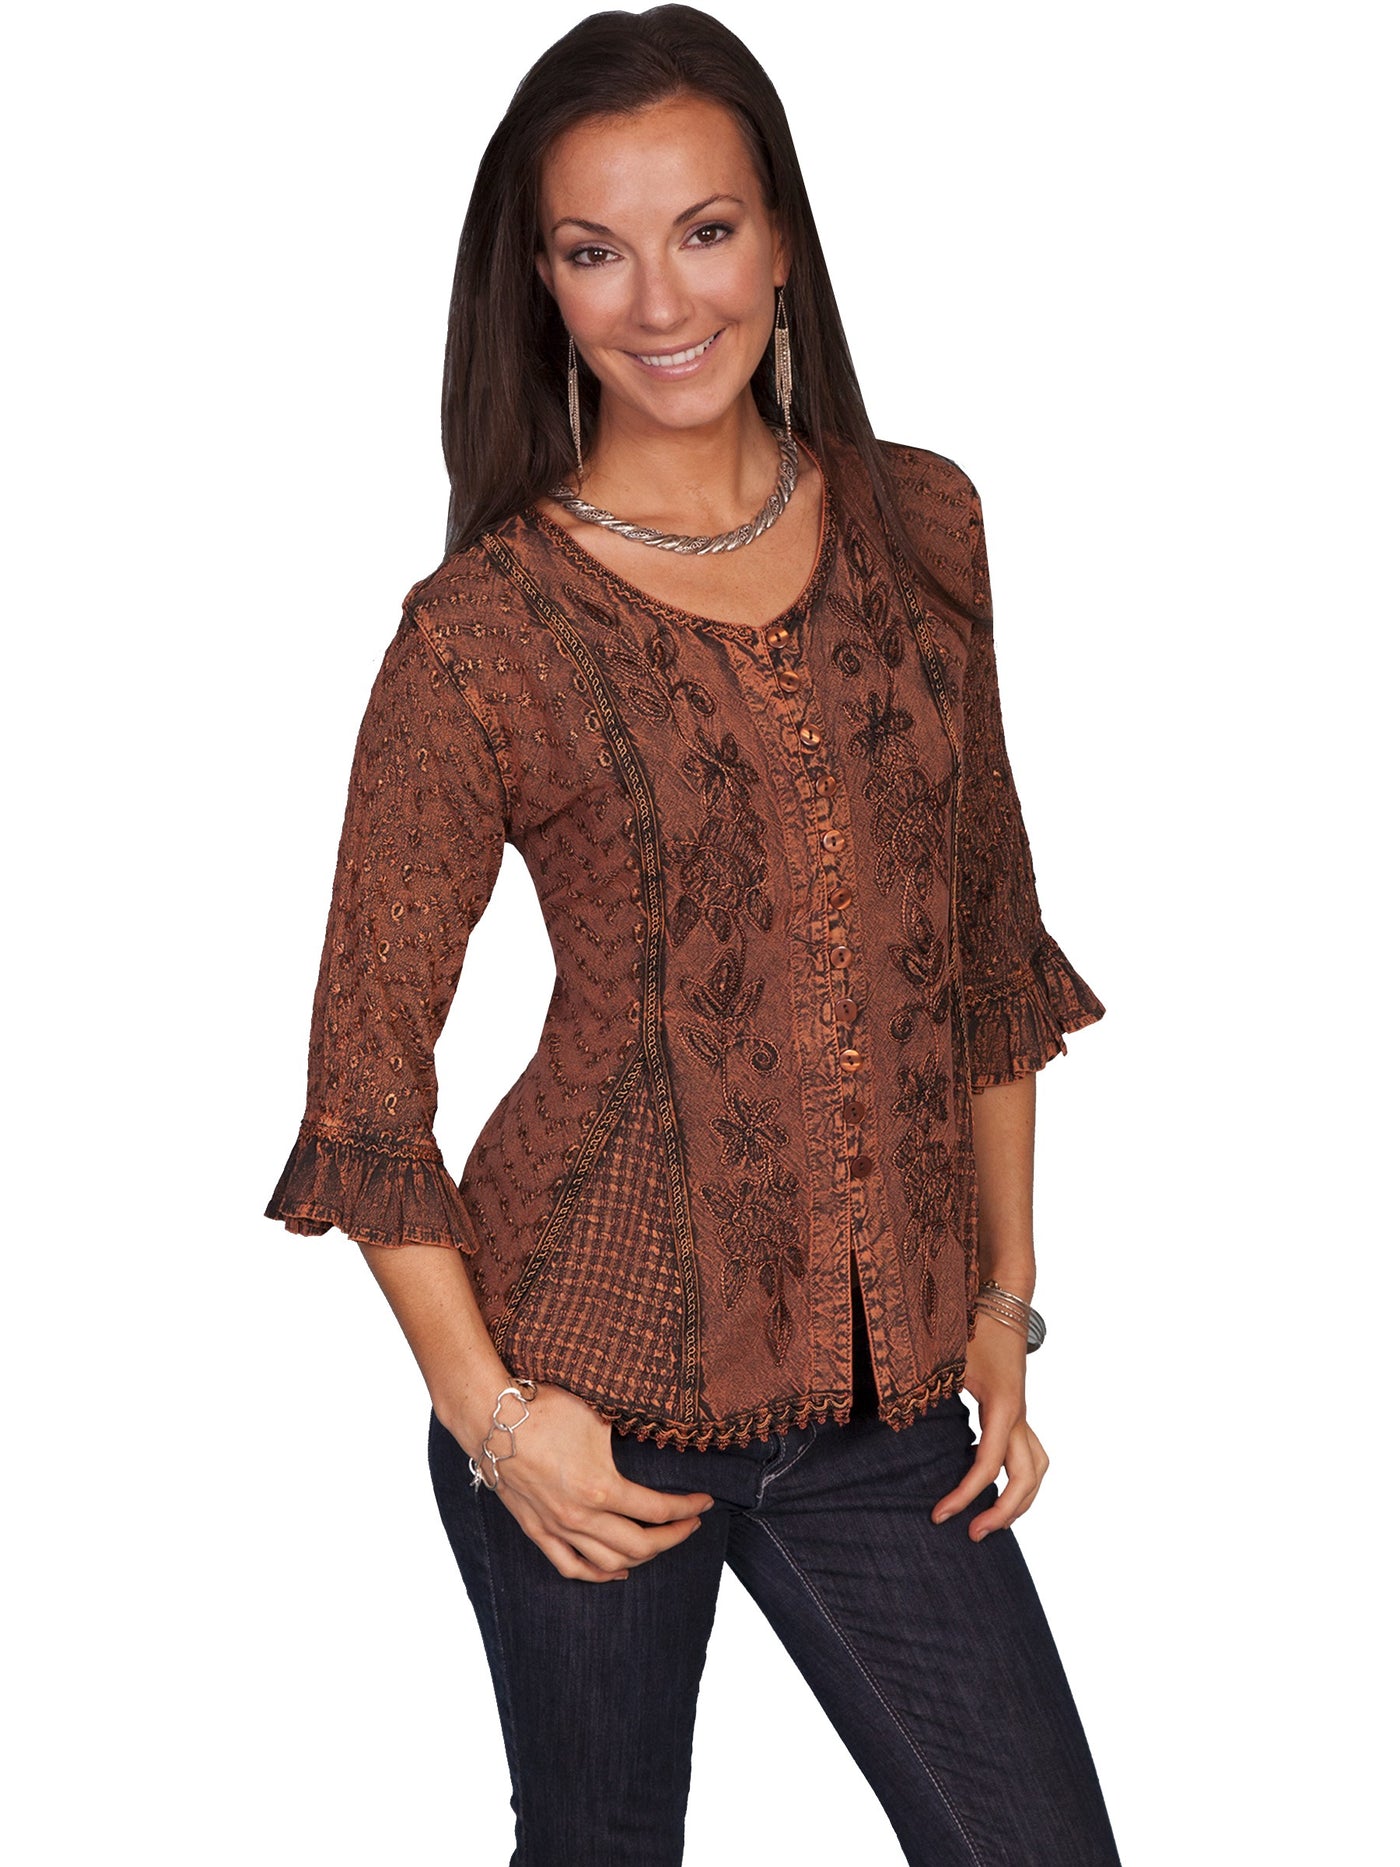 Cowgirl Multi-Fabric Blouse in Copper - SOLD OUT